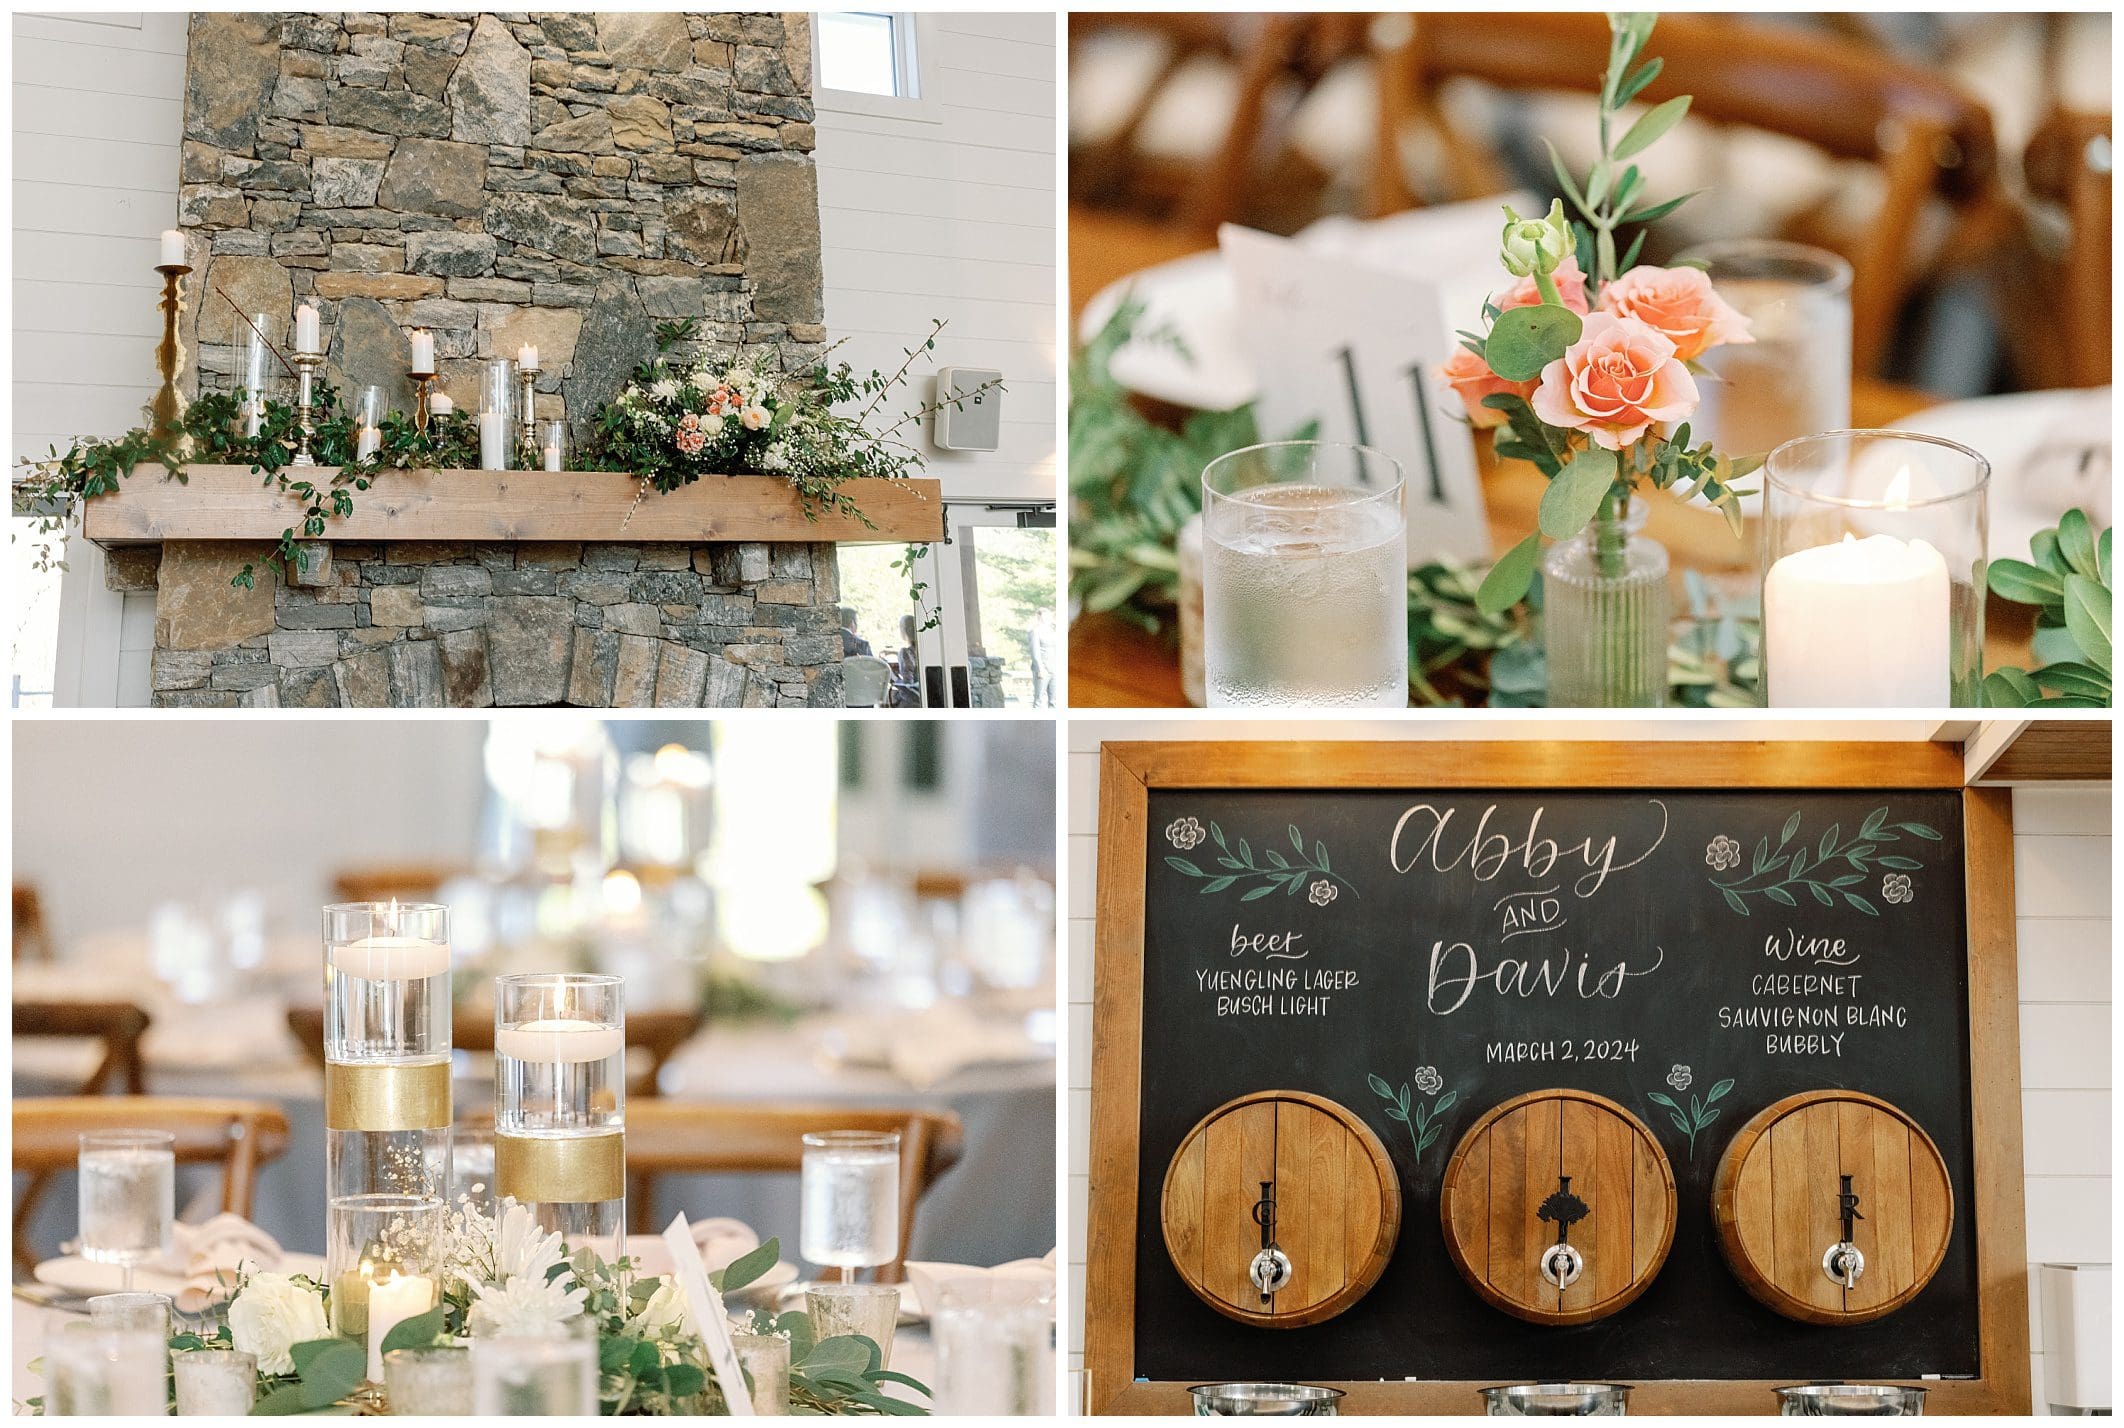 A collage of pictures of a wedding reception with wine barrels and flowers.